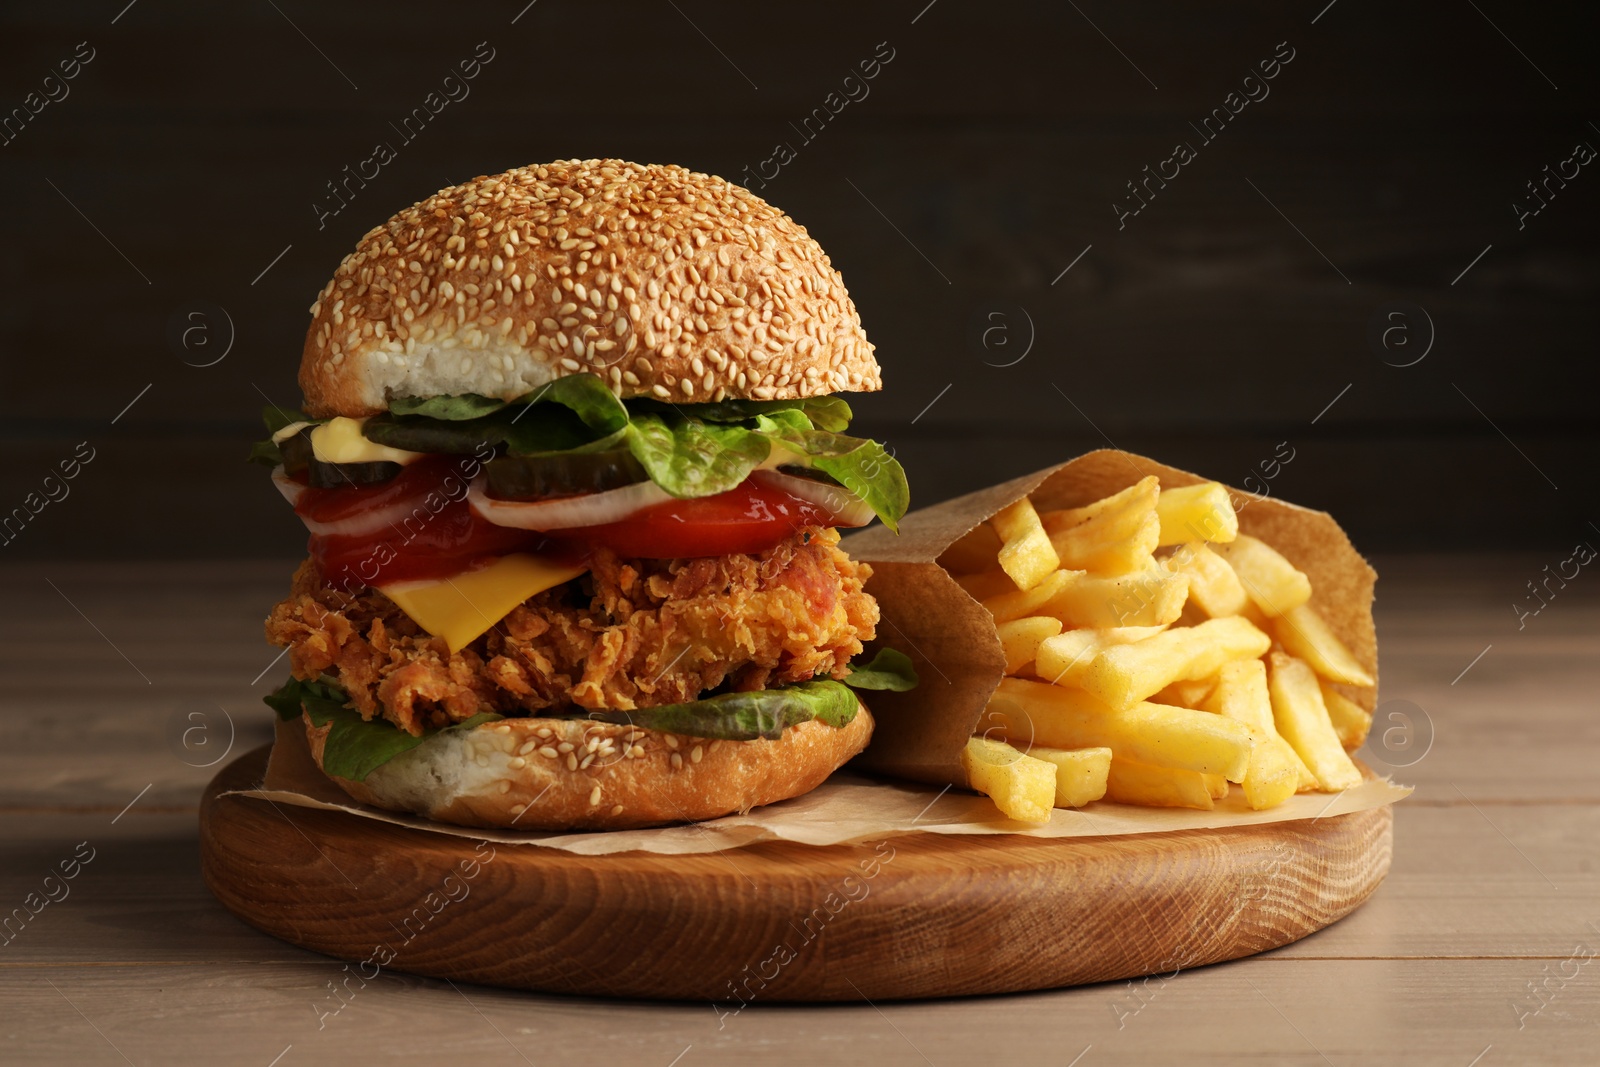 Photo of Delicious burger with crispy chicken patty and french fries on wooden table